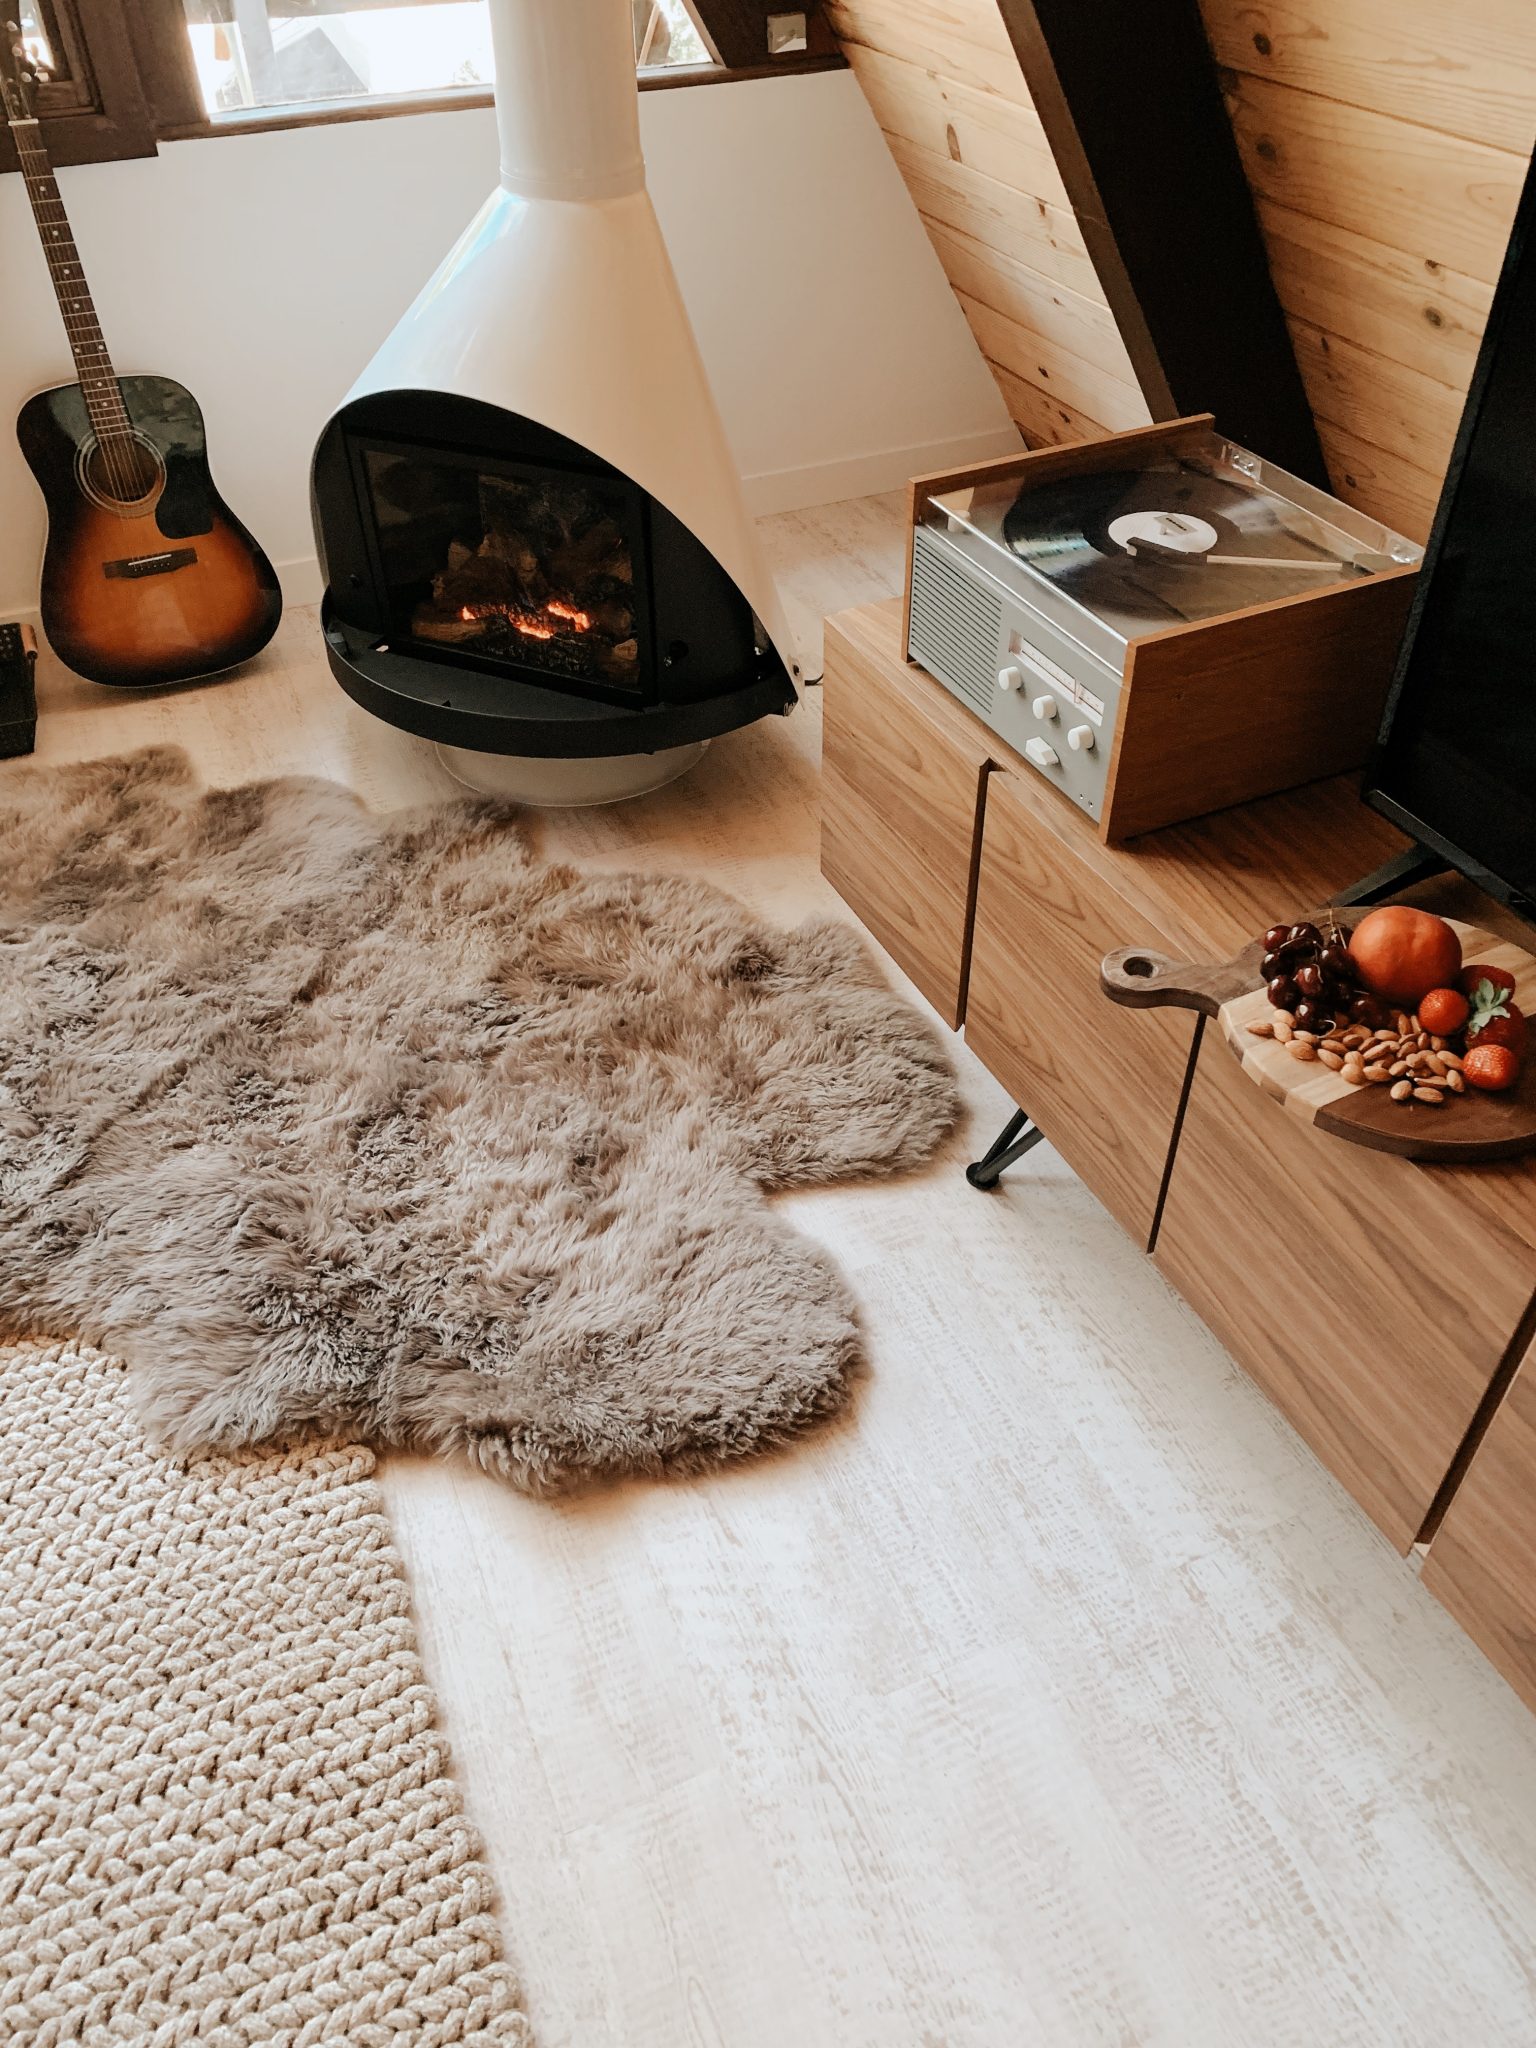 Why We Chose Karndean Flooring For Our Cabin by popular life and style blog, Just Add Glam: image of an A-Frame cabin with Karndean flooring.